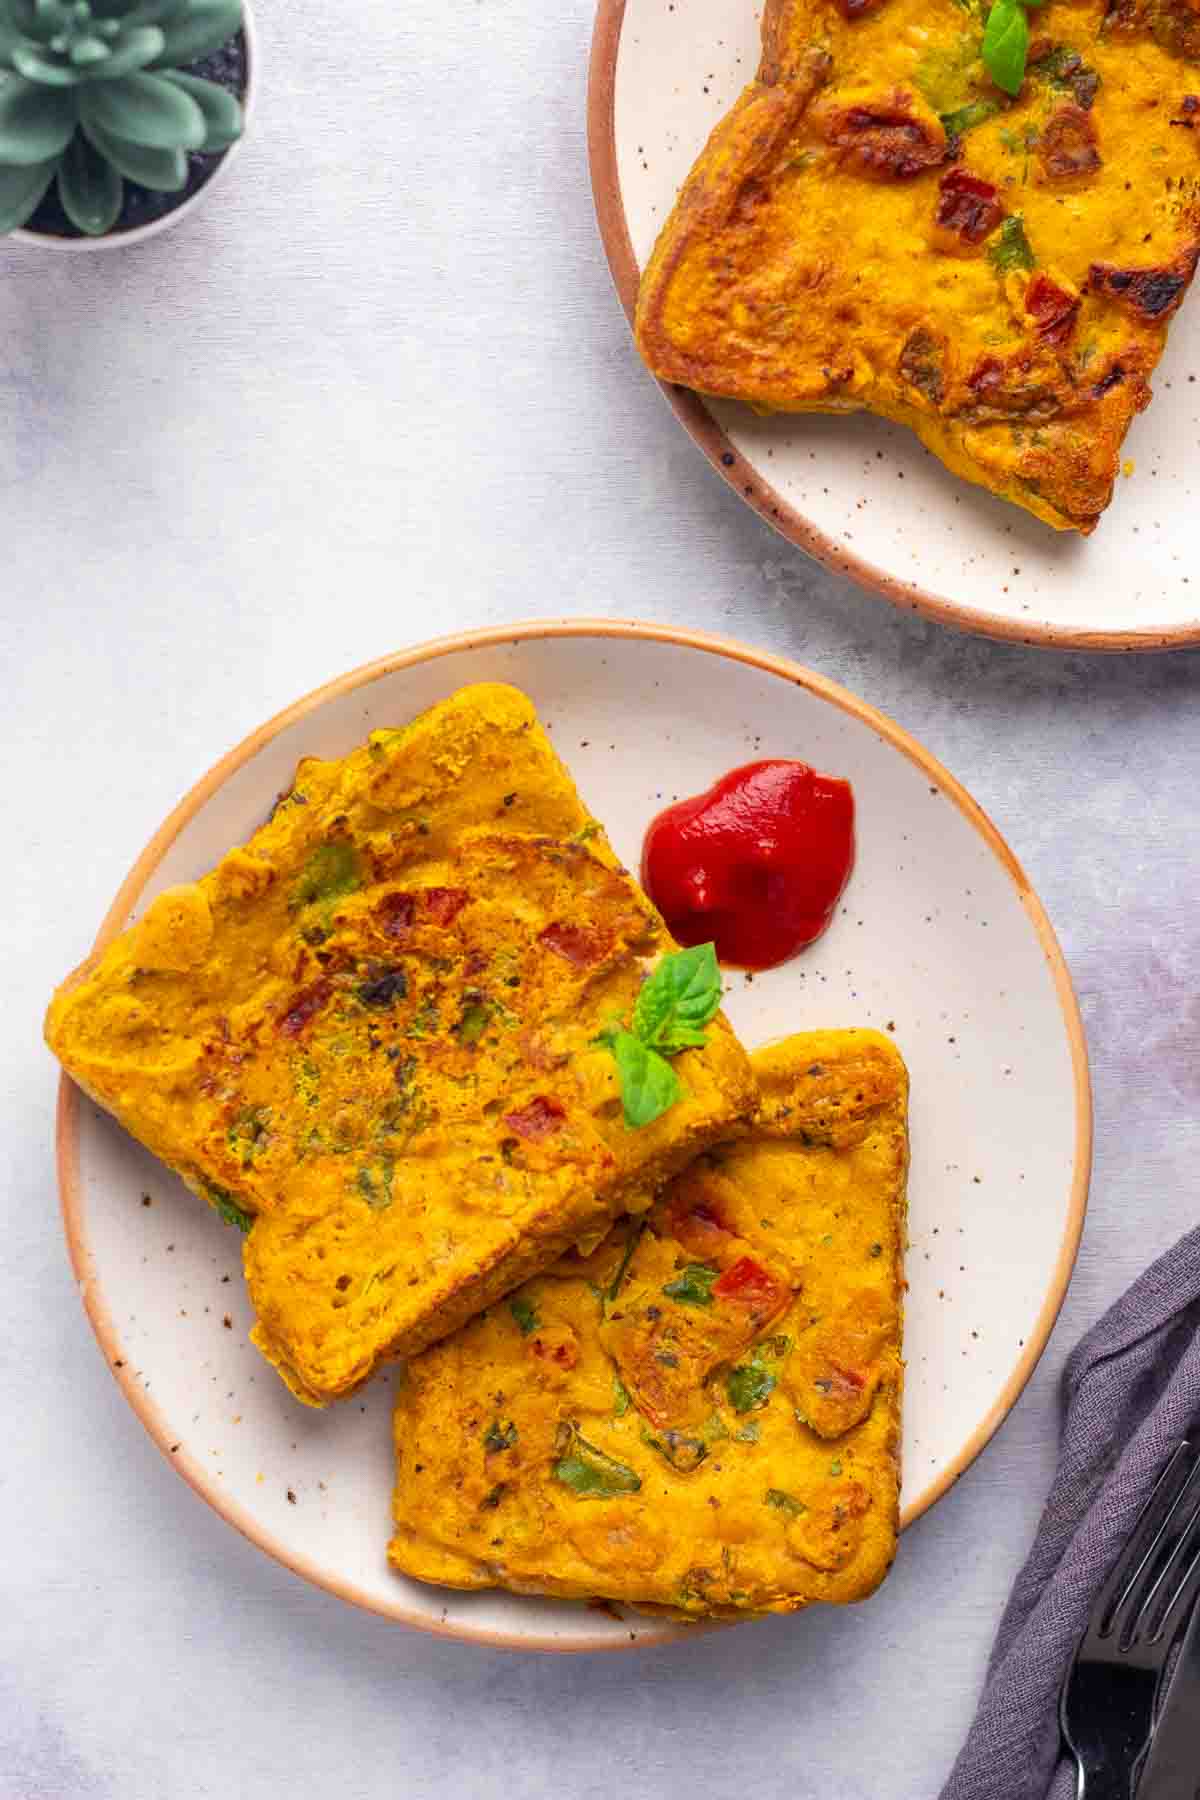 Masala toast on a plate with some tomato sauce.